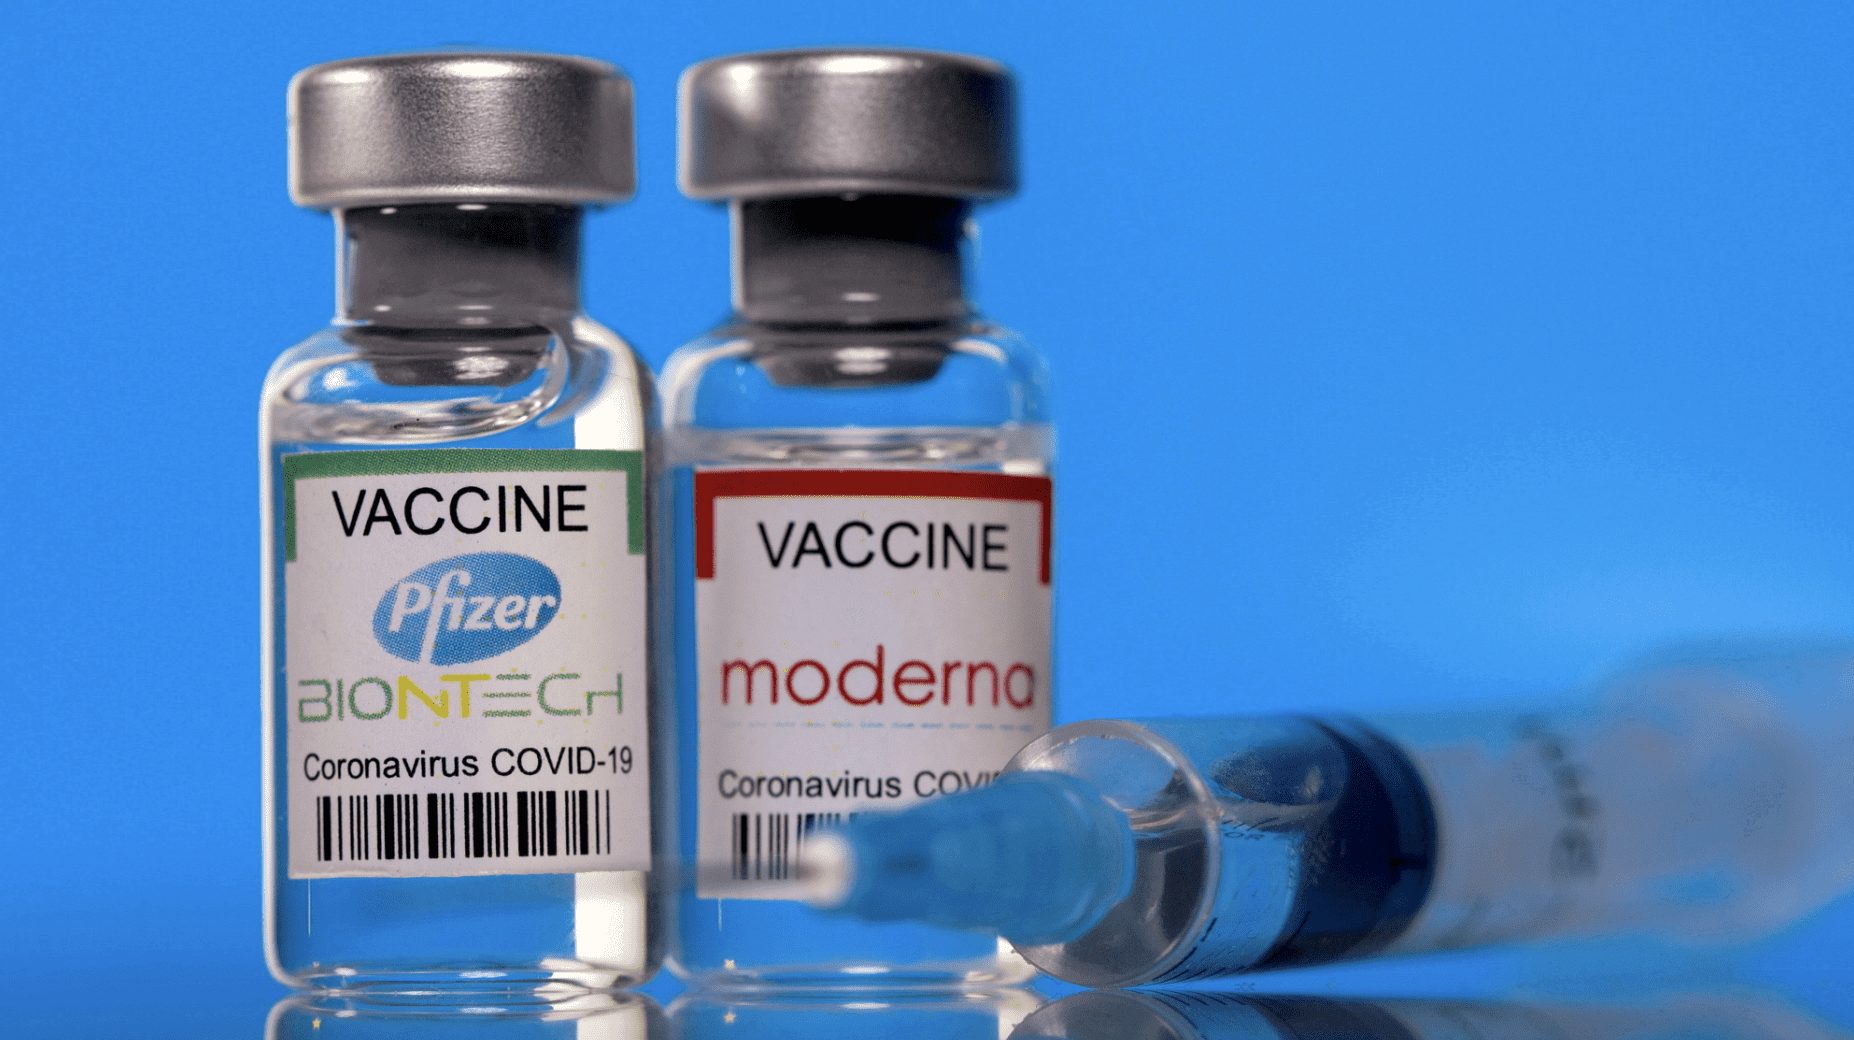 Study: Moderna Vaccine Increases Heart Inflammation in Young Adults